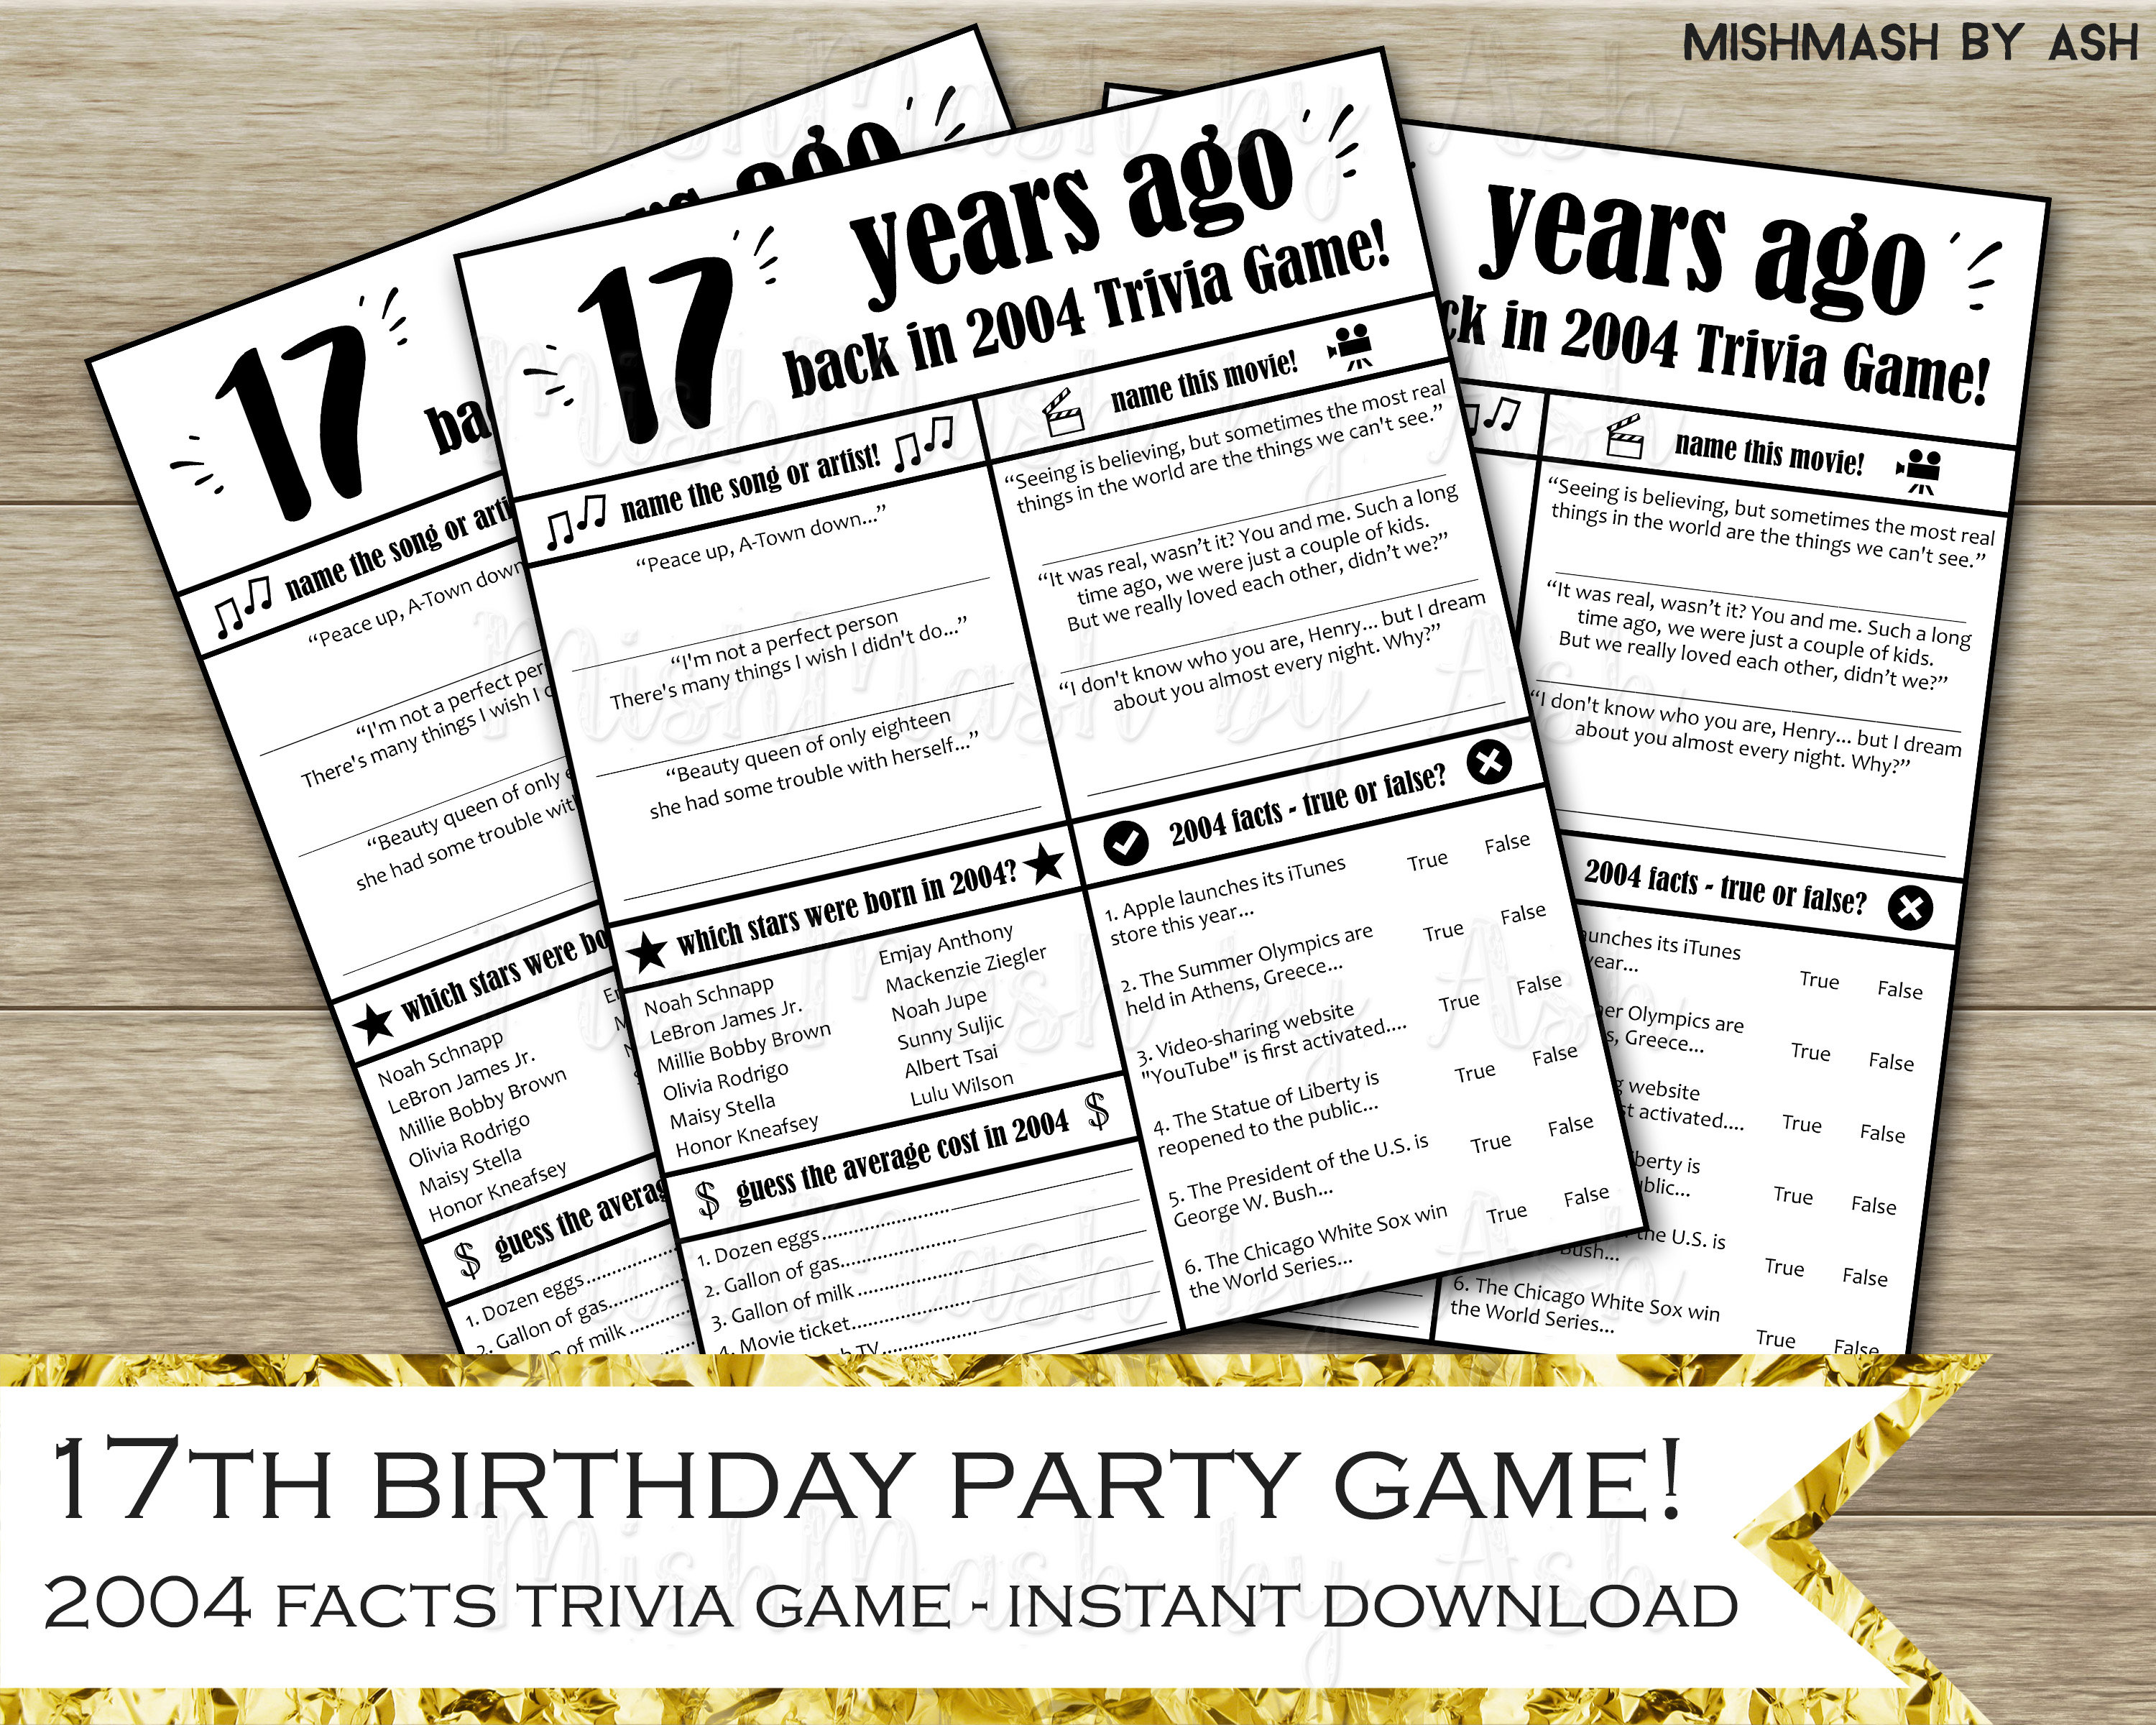 17th-birthday-party-games-cowinformation